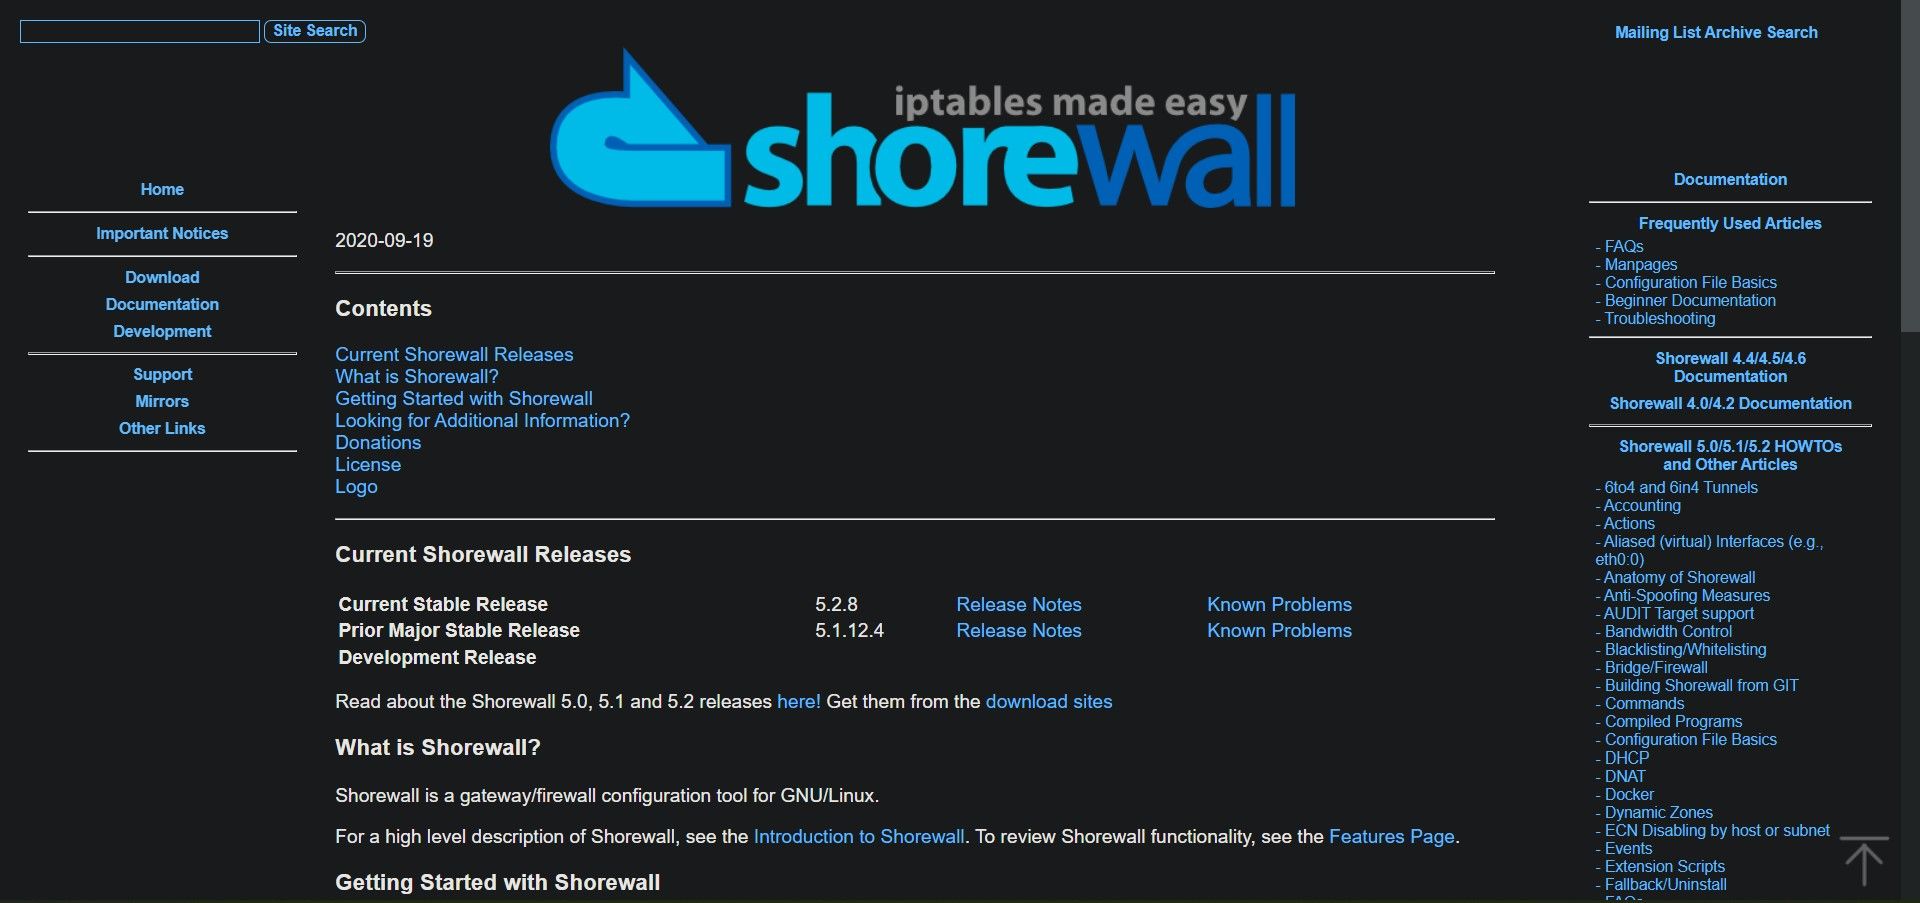 shorewall website home page